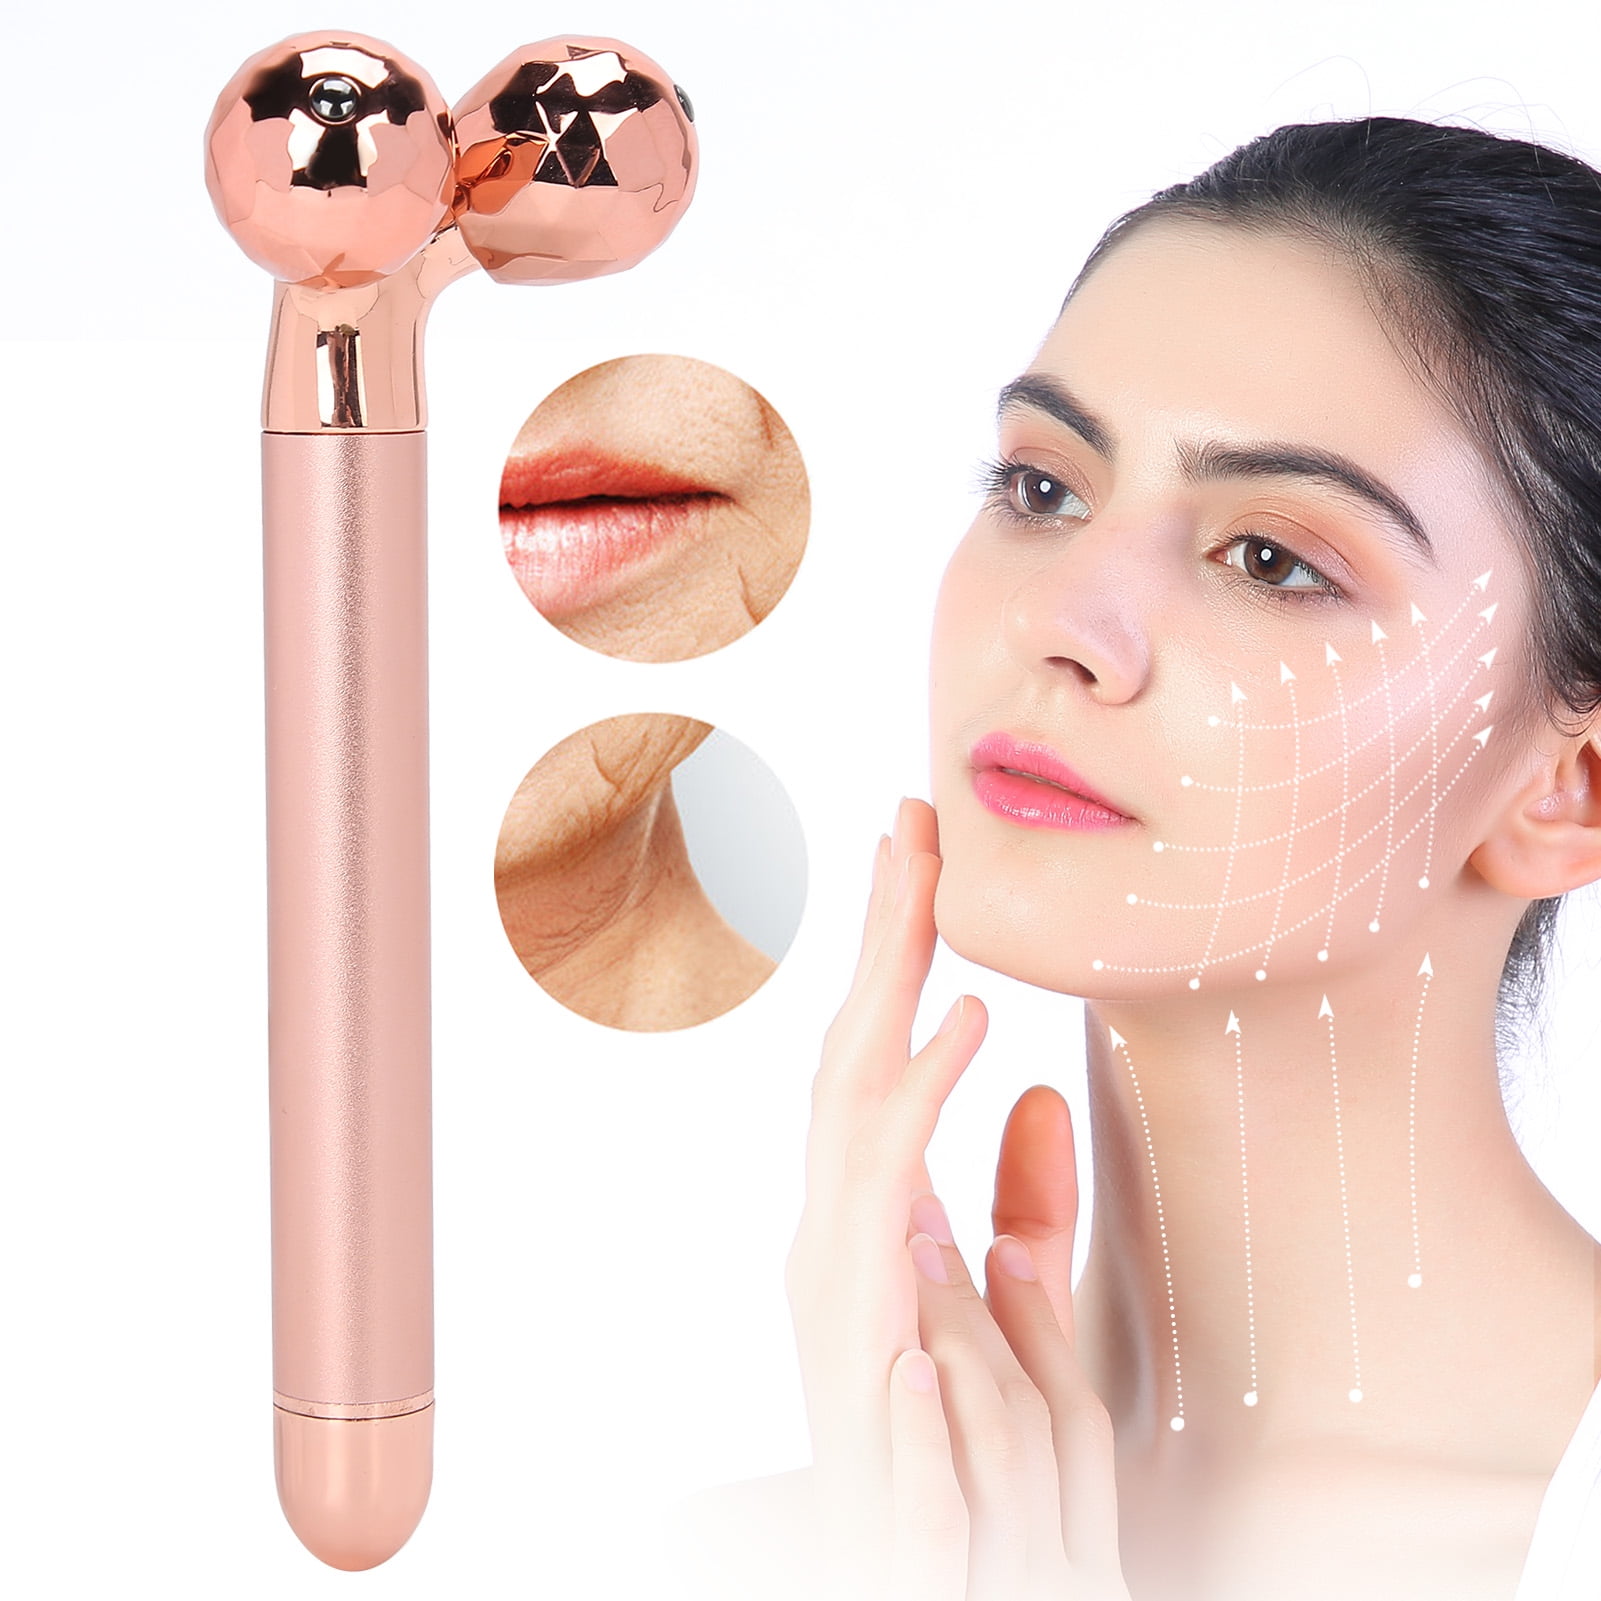 shenghang New Face Roller Massager Thin Face Lift Plastic Massager Manual  Massage Tool Face Fat Remover Slimming Beauty Tool for Face Up